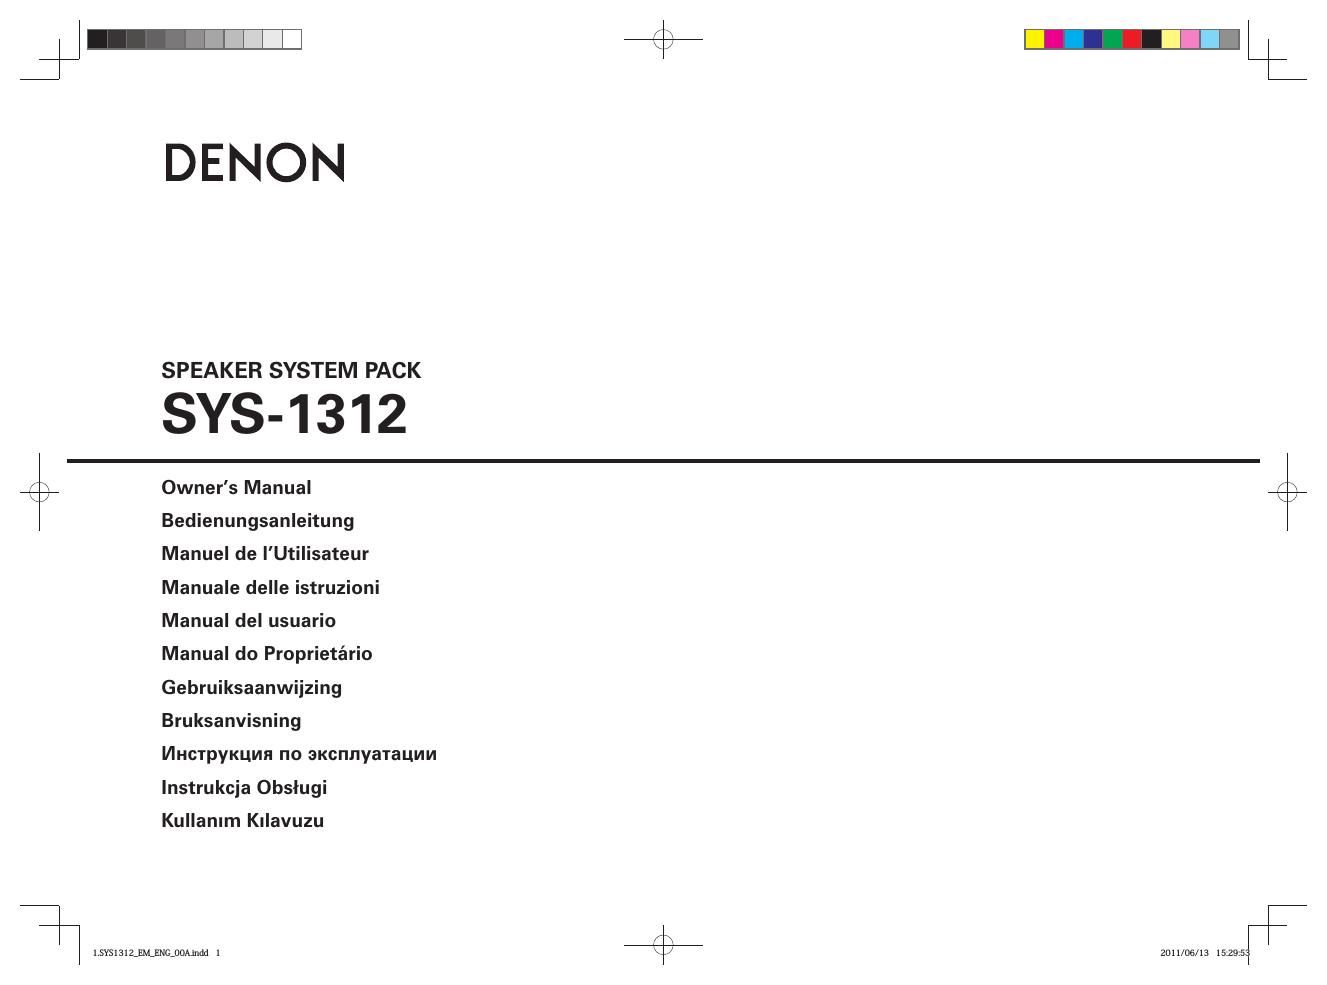 Denon SYS 1312 Owners Manual